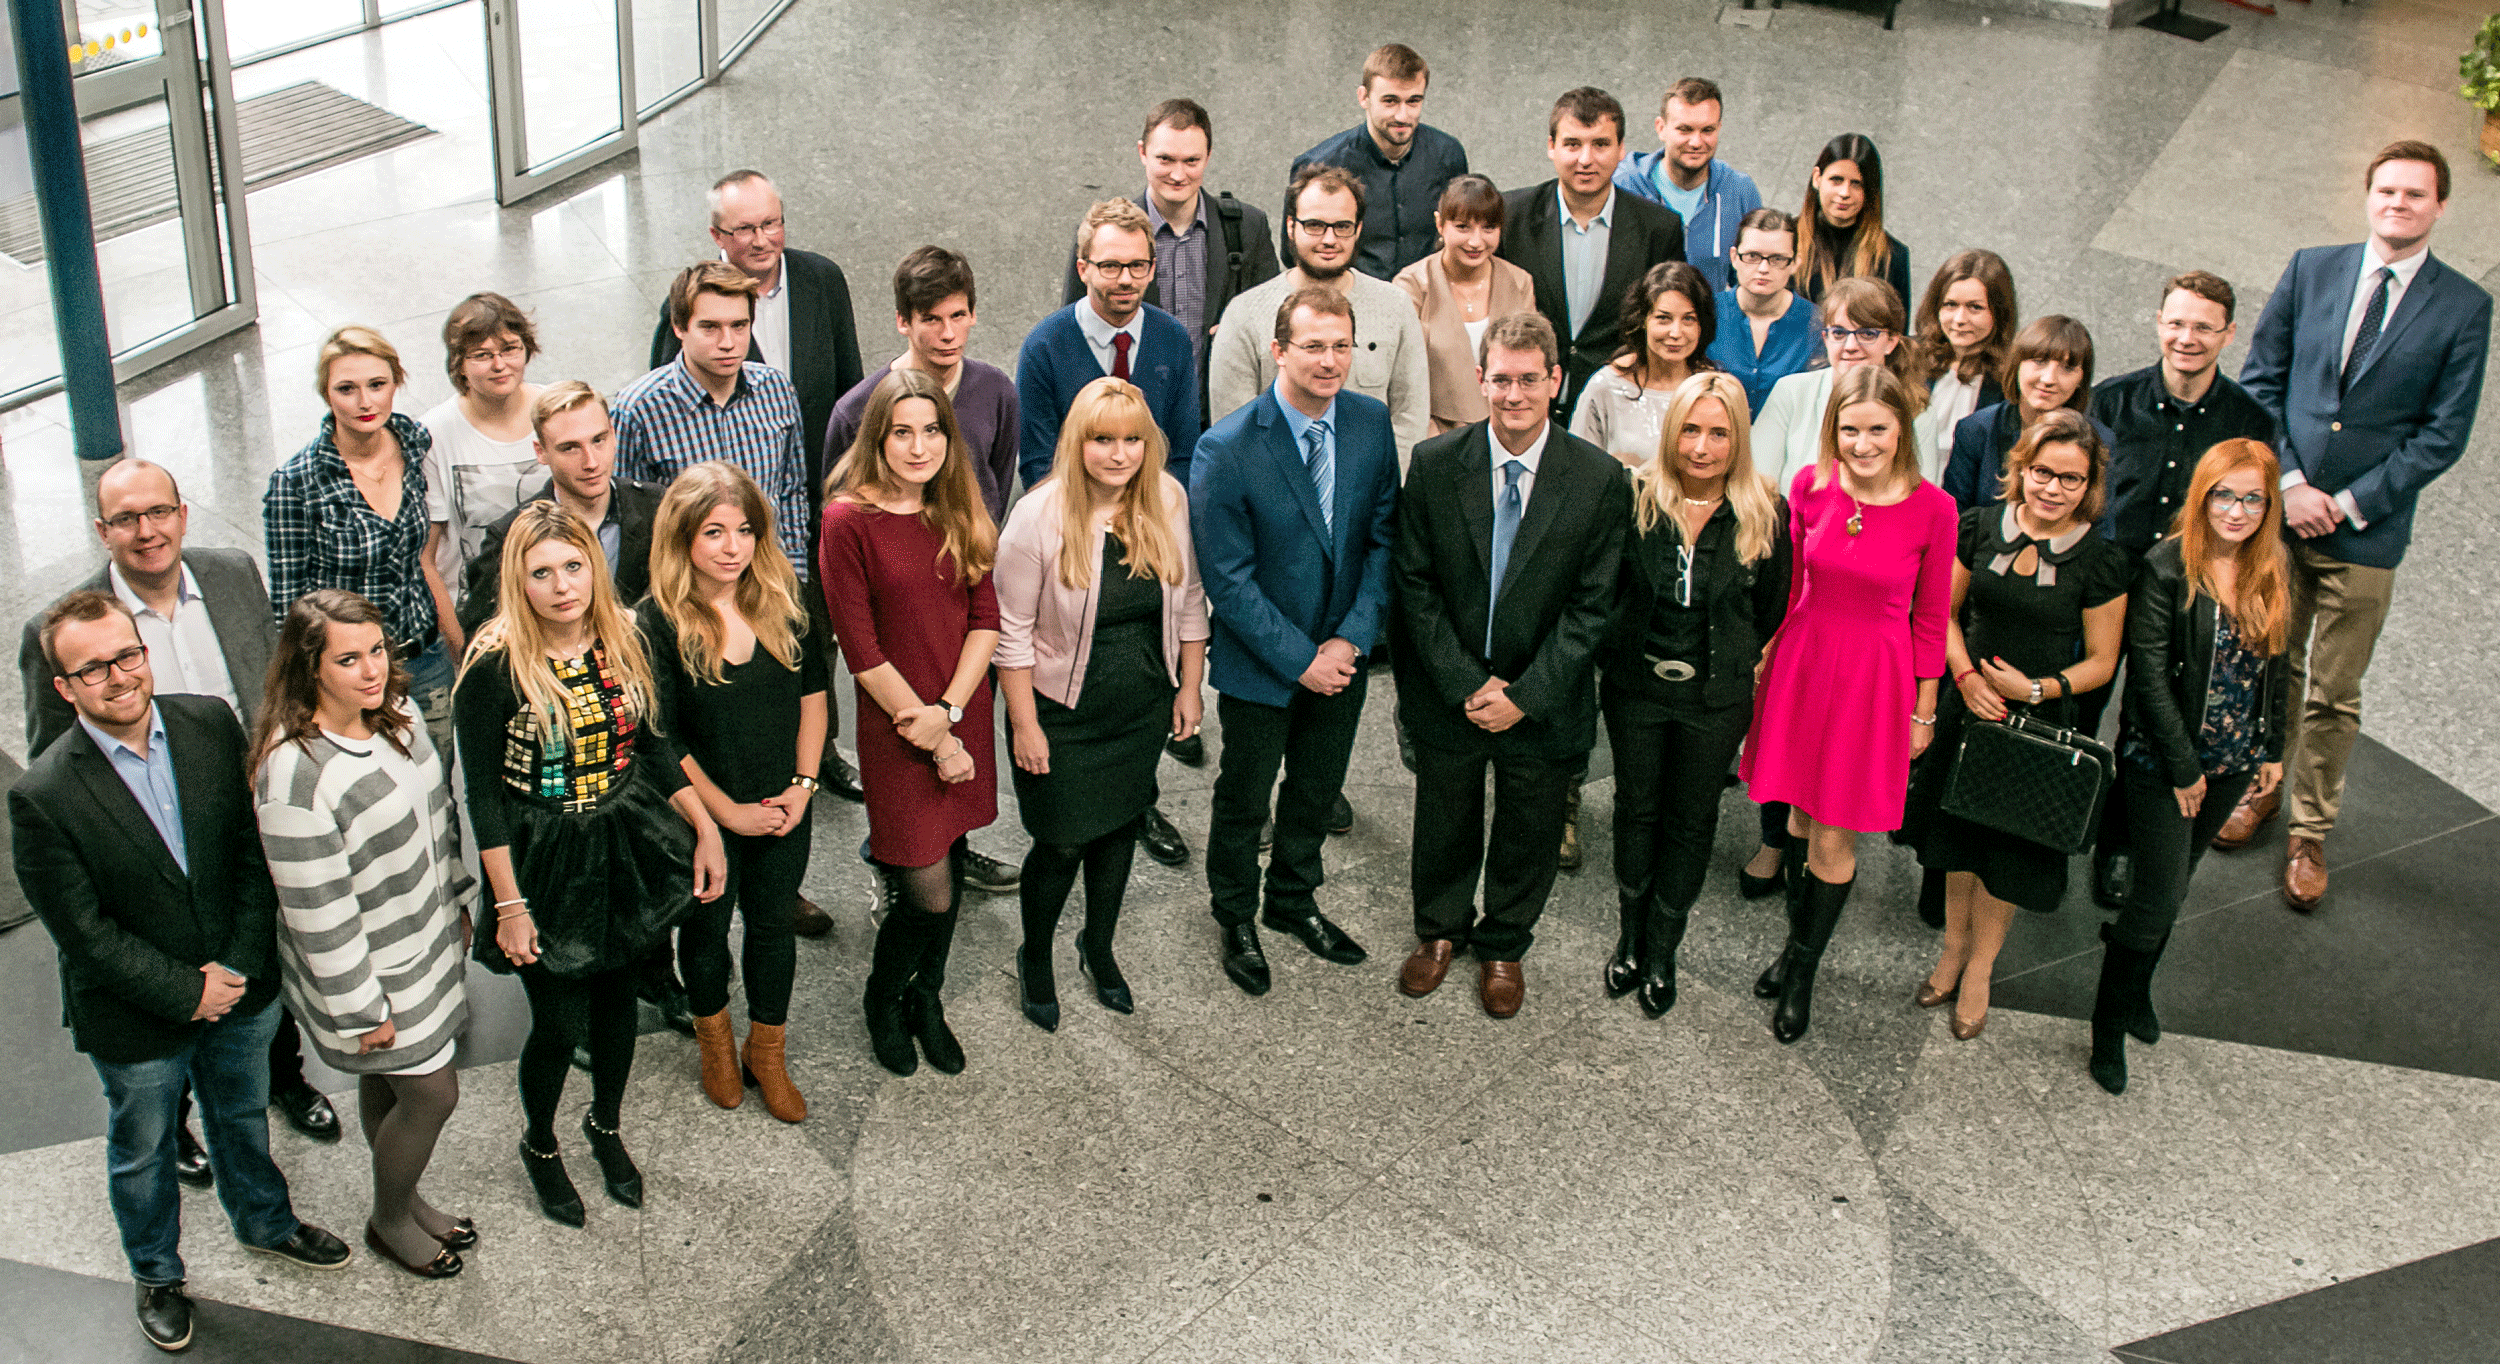 The first class of the U.S. School of Law at the University of Silesia in Poland.